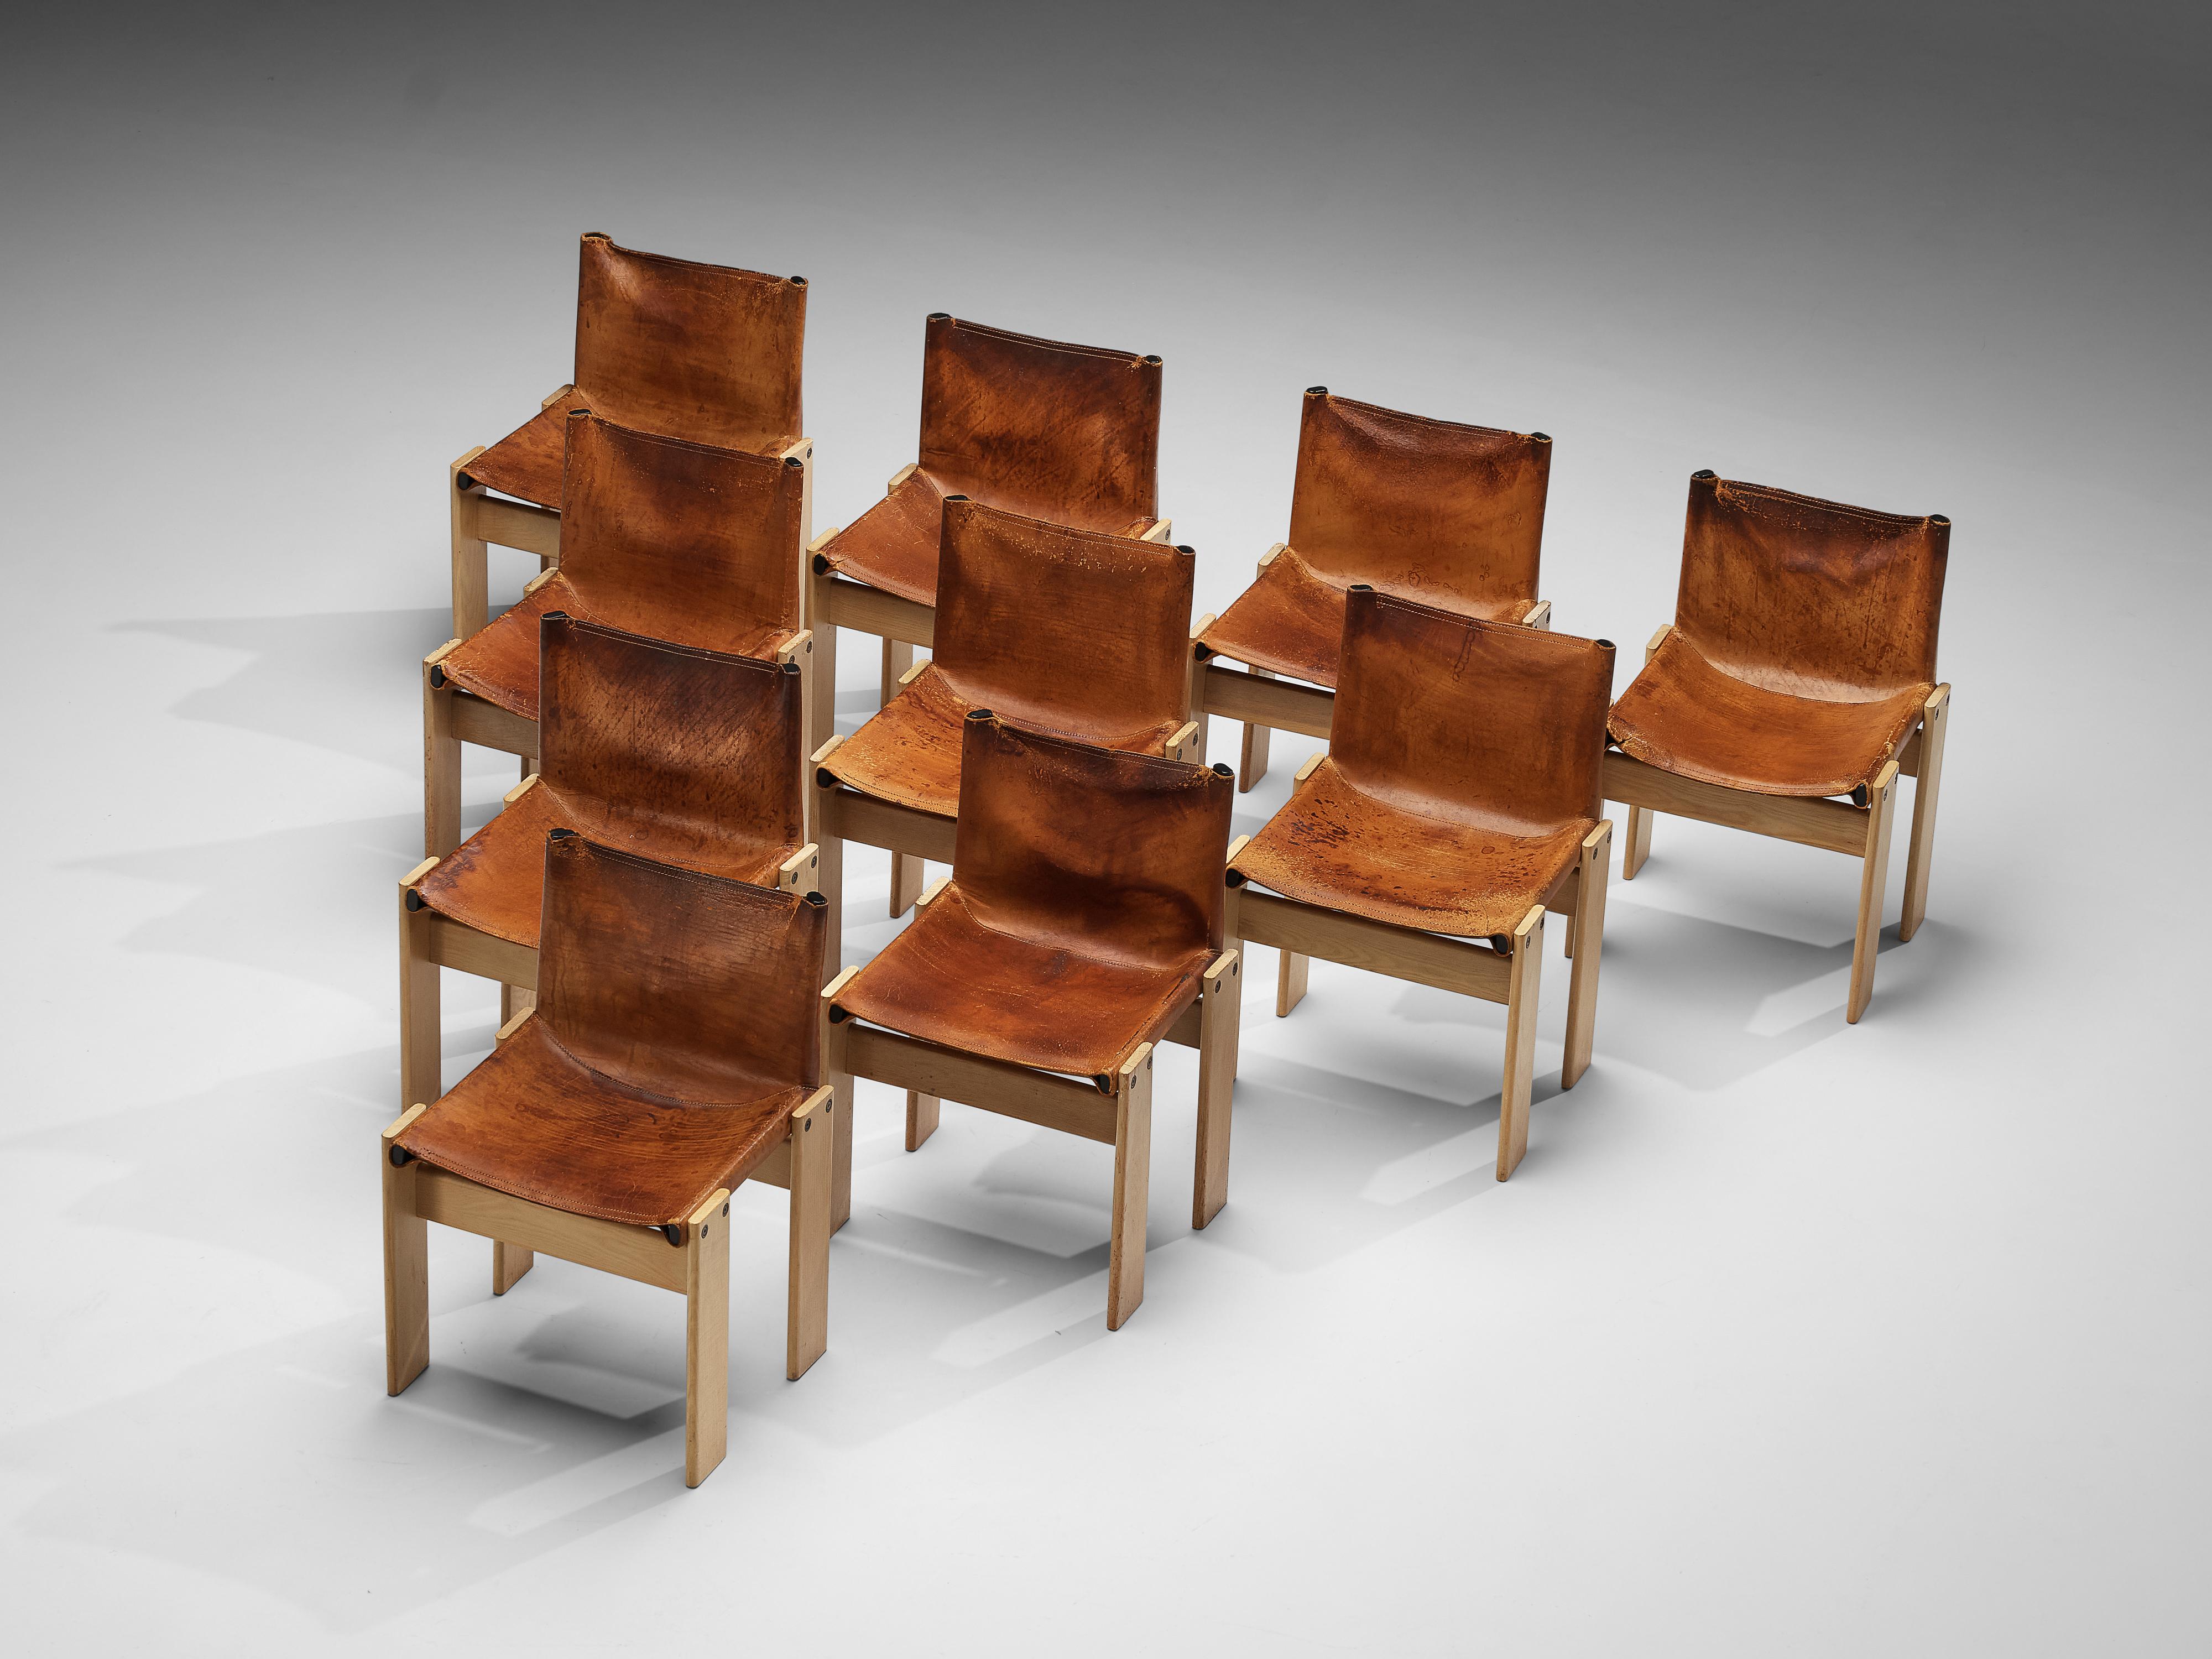 Afra & Tobia Scarpa for Molteni Set of 10 Monk Chairs in Cognac Leather 1